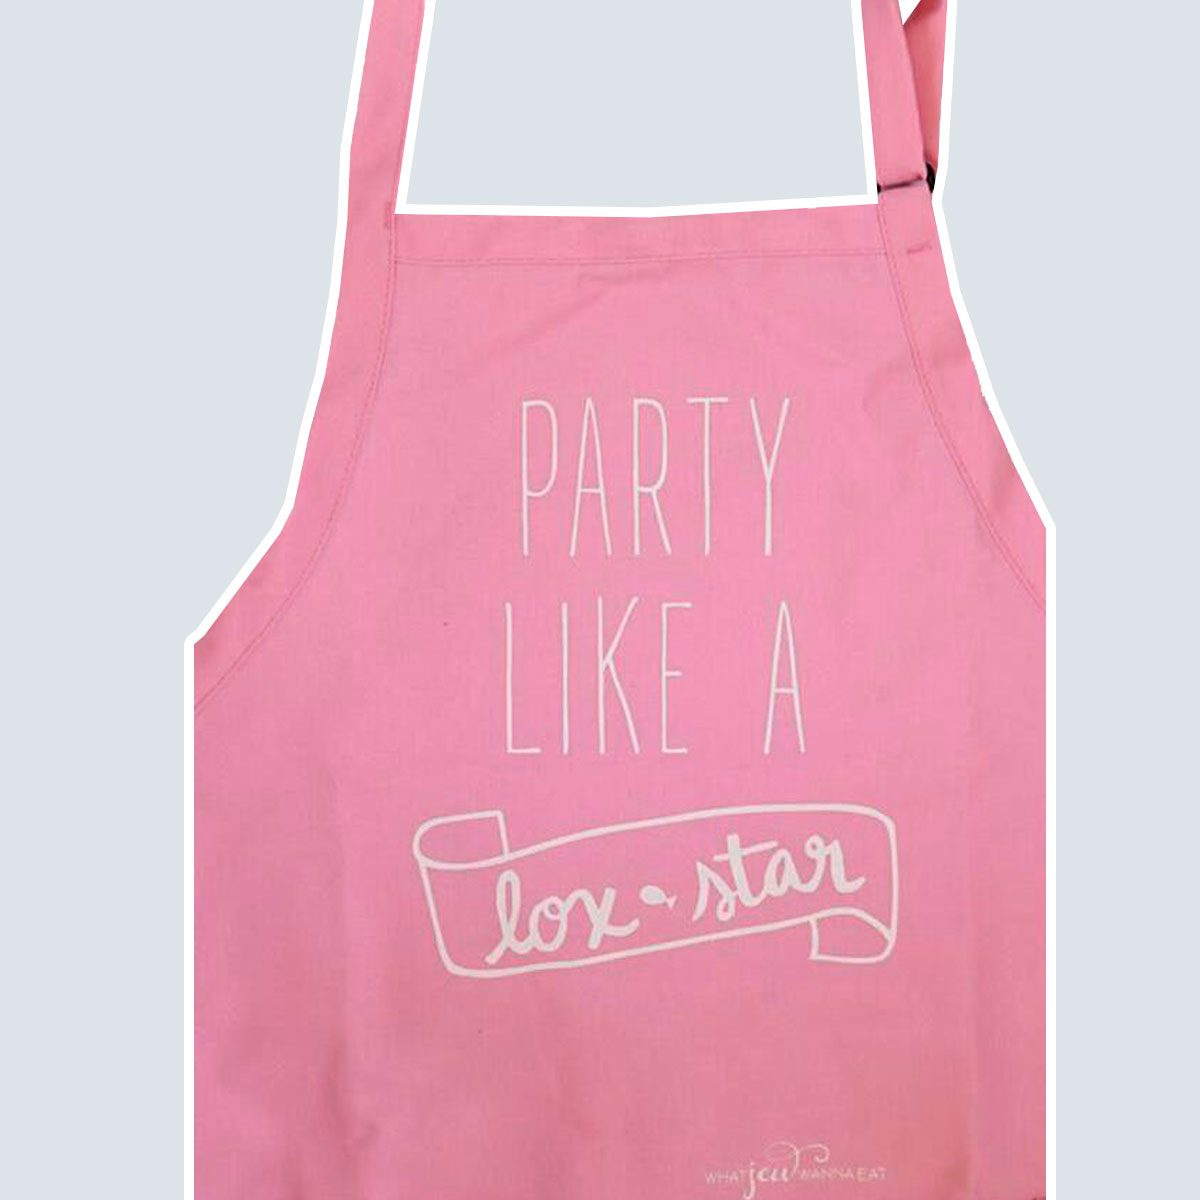 PARTY LIKE A LOX STAR APRON - BABY PINK